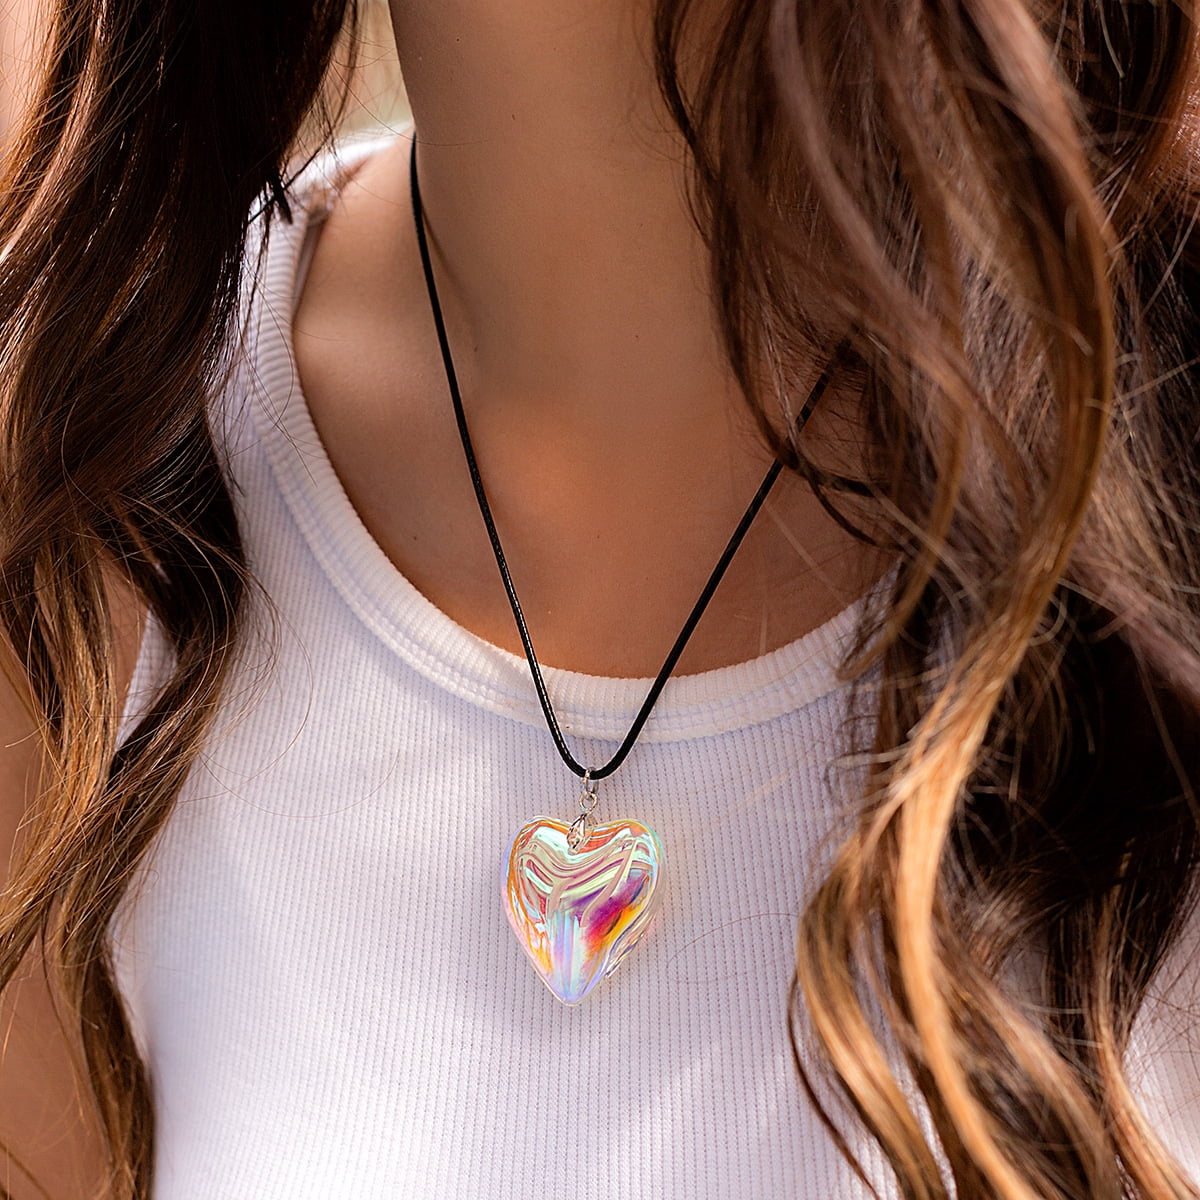 The Chunky Heart Necklace Is A New Jewelry Trend All Over The Internet